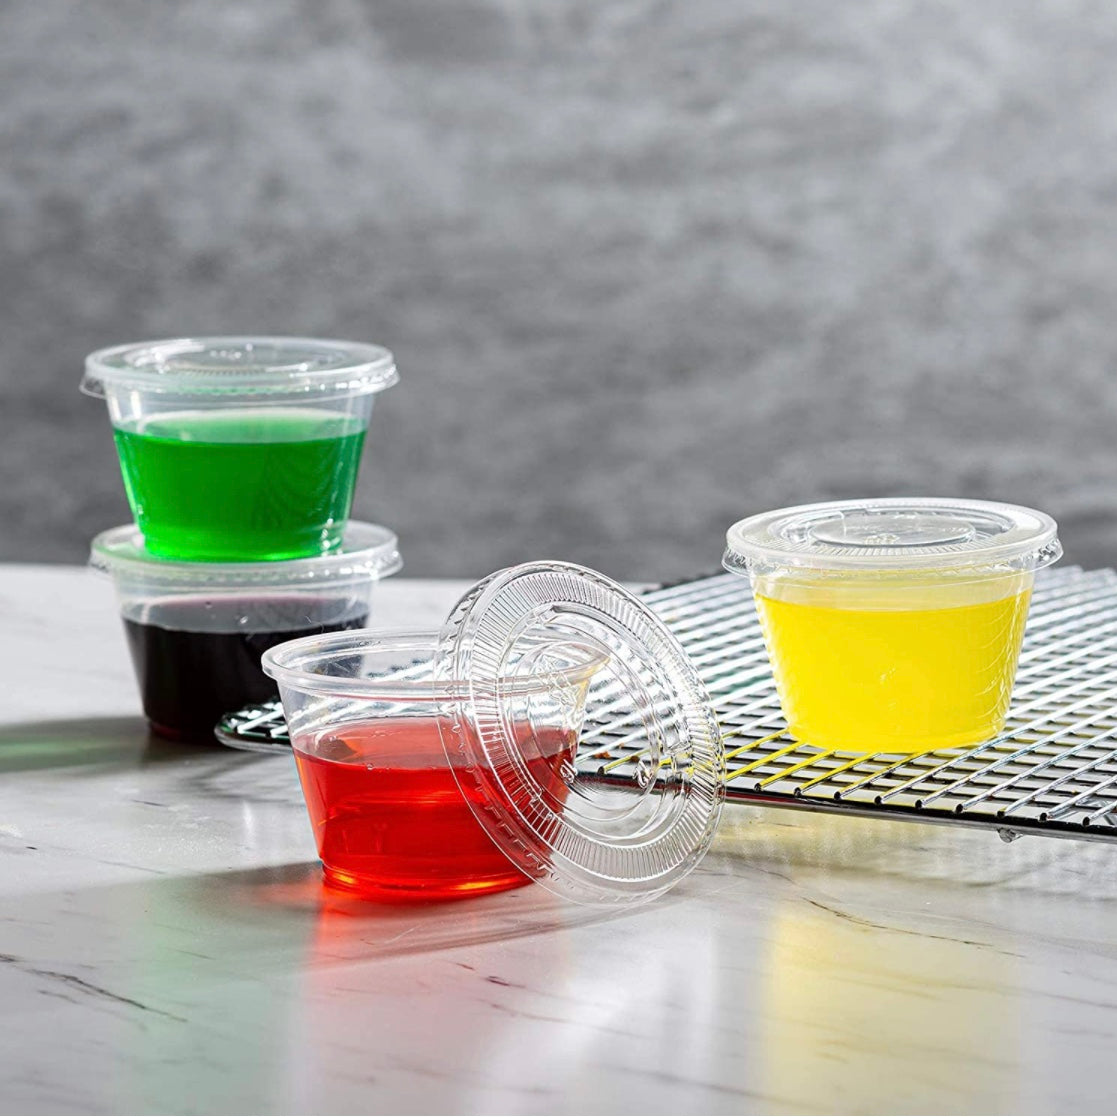 Clear Jello Shot Cups With Lids, Plastic Portion Cups / Condiment